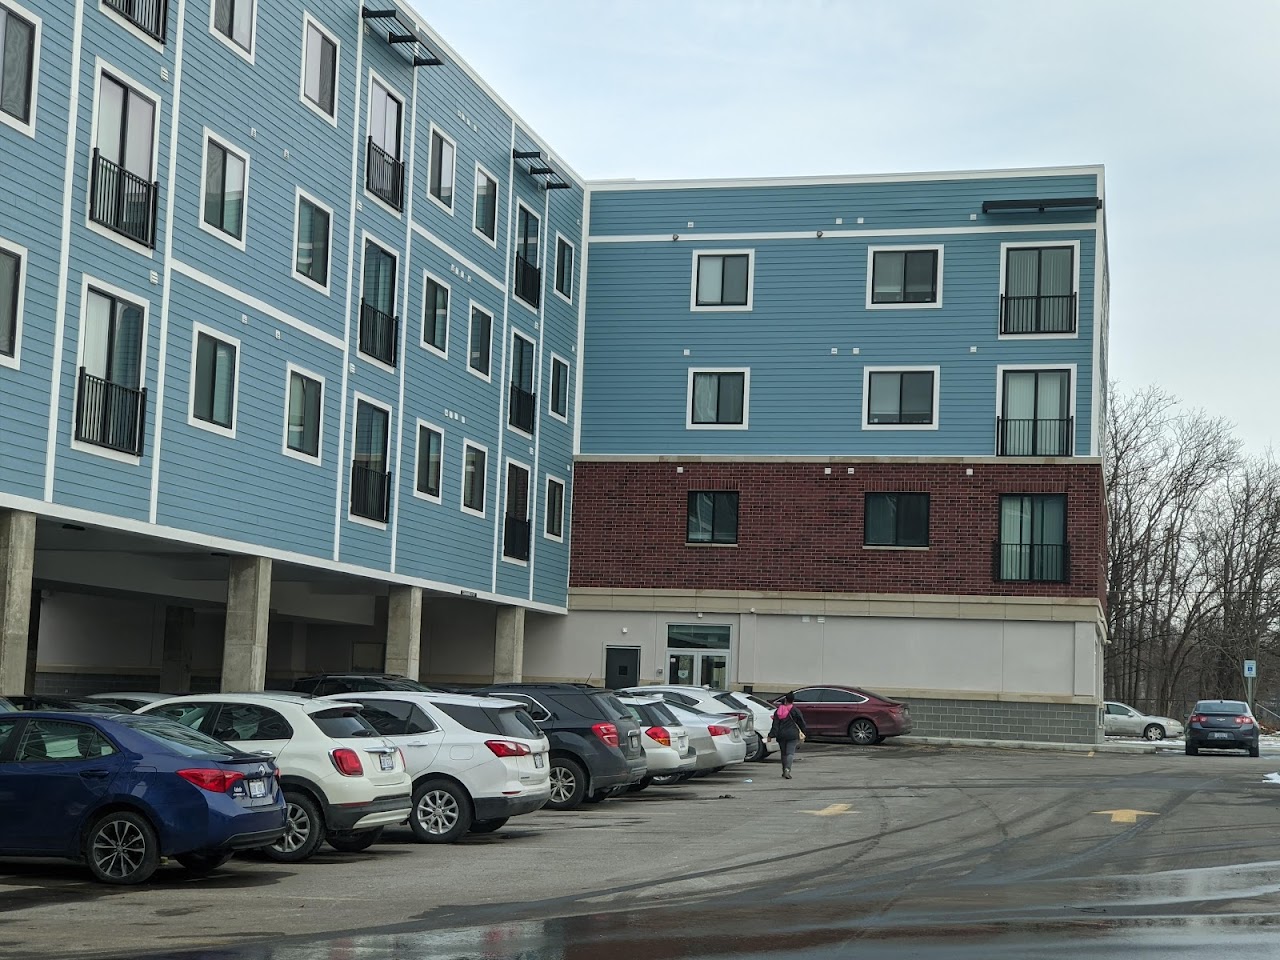 Photo of 310 EAST THIRD STREET APTS. Affordable housing located at 310 EAST THIRD STREET FLINT, MI 48502